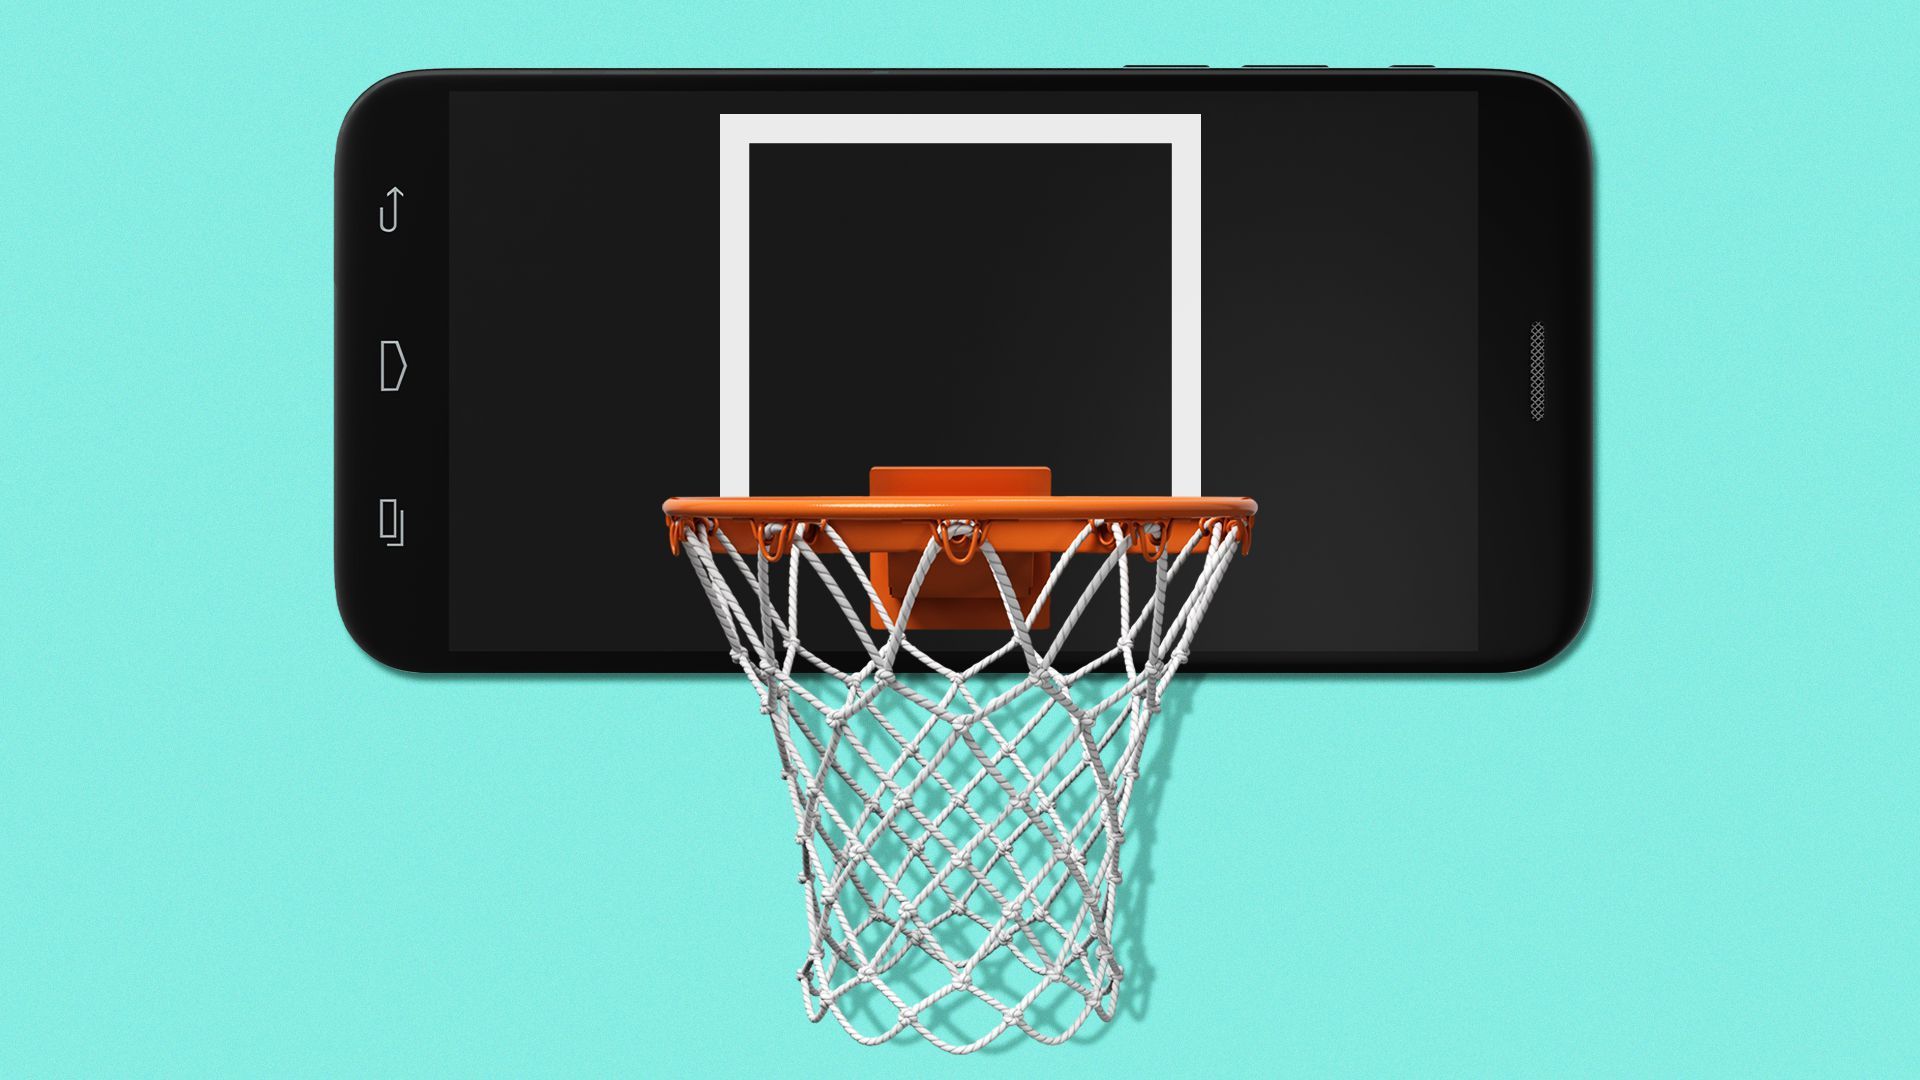 Illustration of a basketball headboard made from a smartphone. 